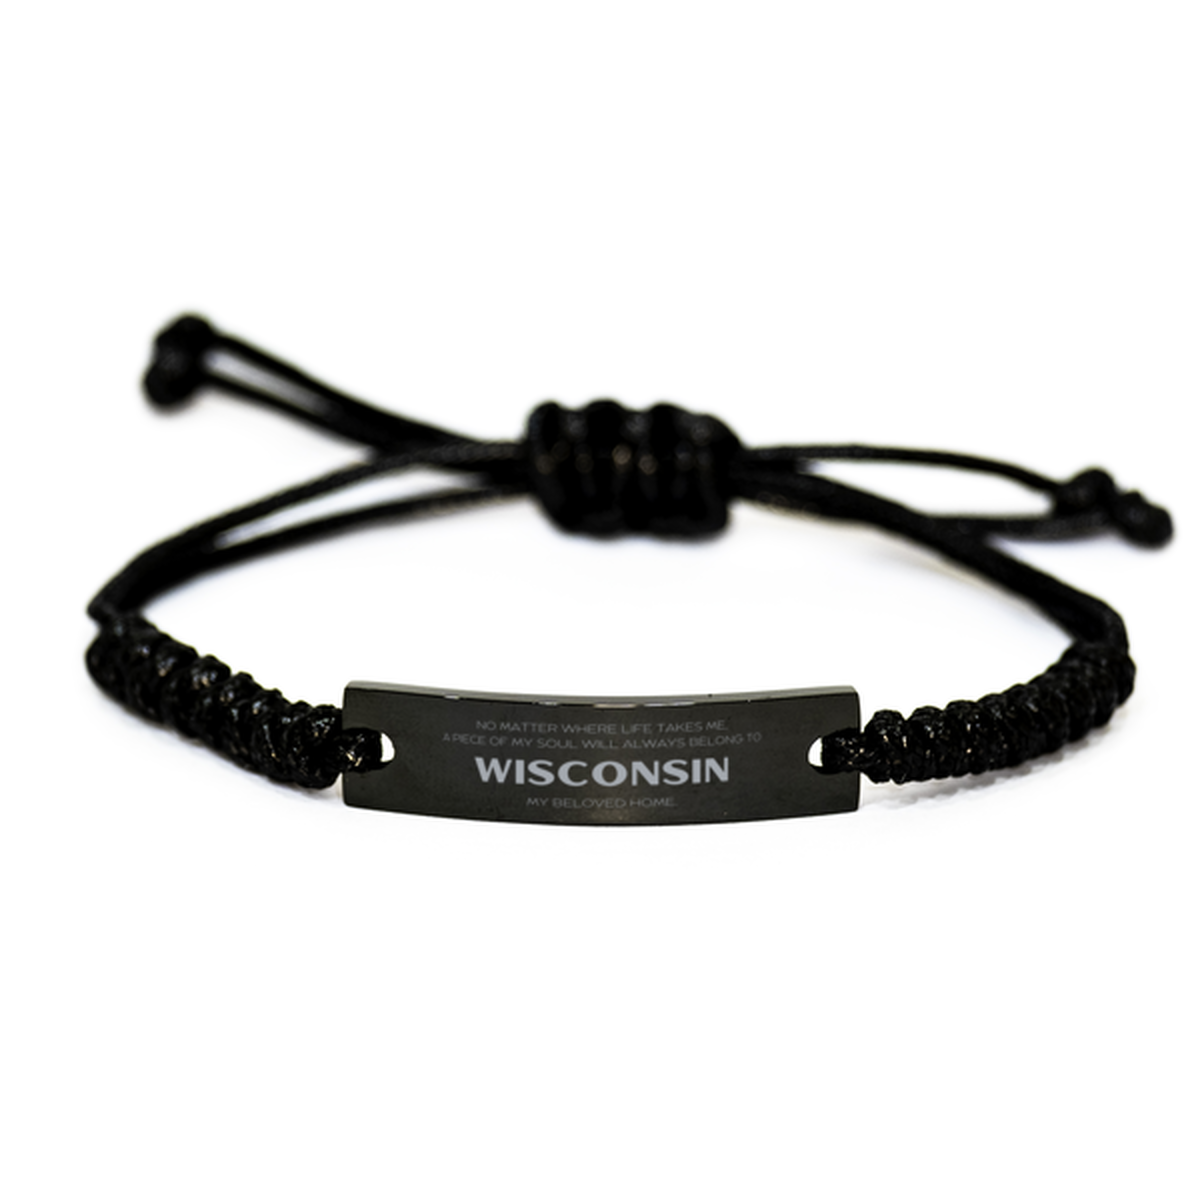 Love Wisconsin State Gifts, My soul will always belong to Wisconsin, Proud Black Rope Bracelet, Birthday Unique Gifts For Wisconsin Men, Women, Friends